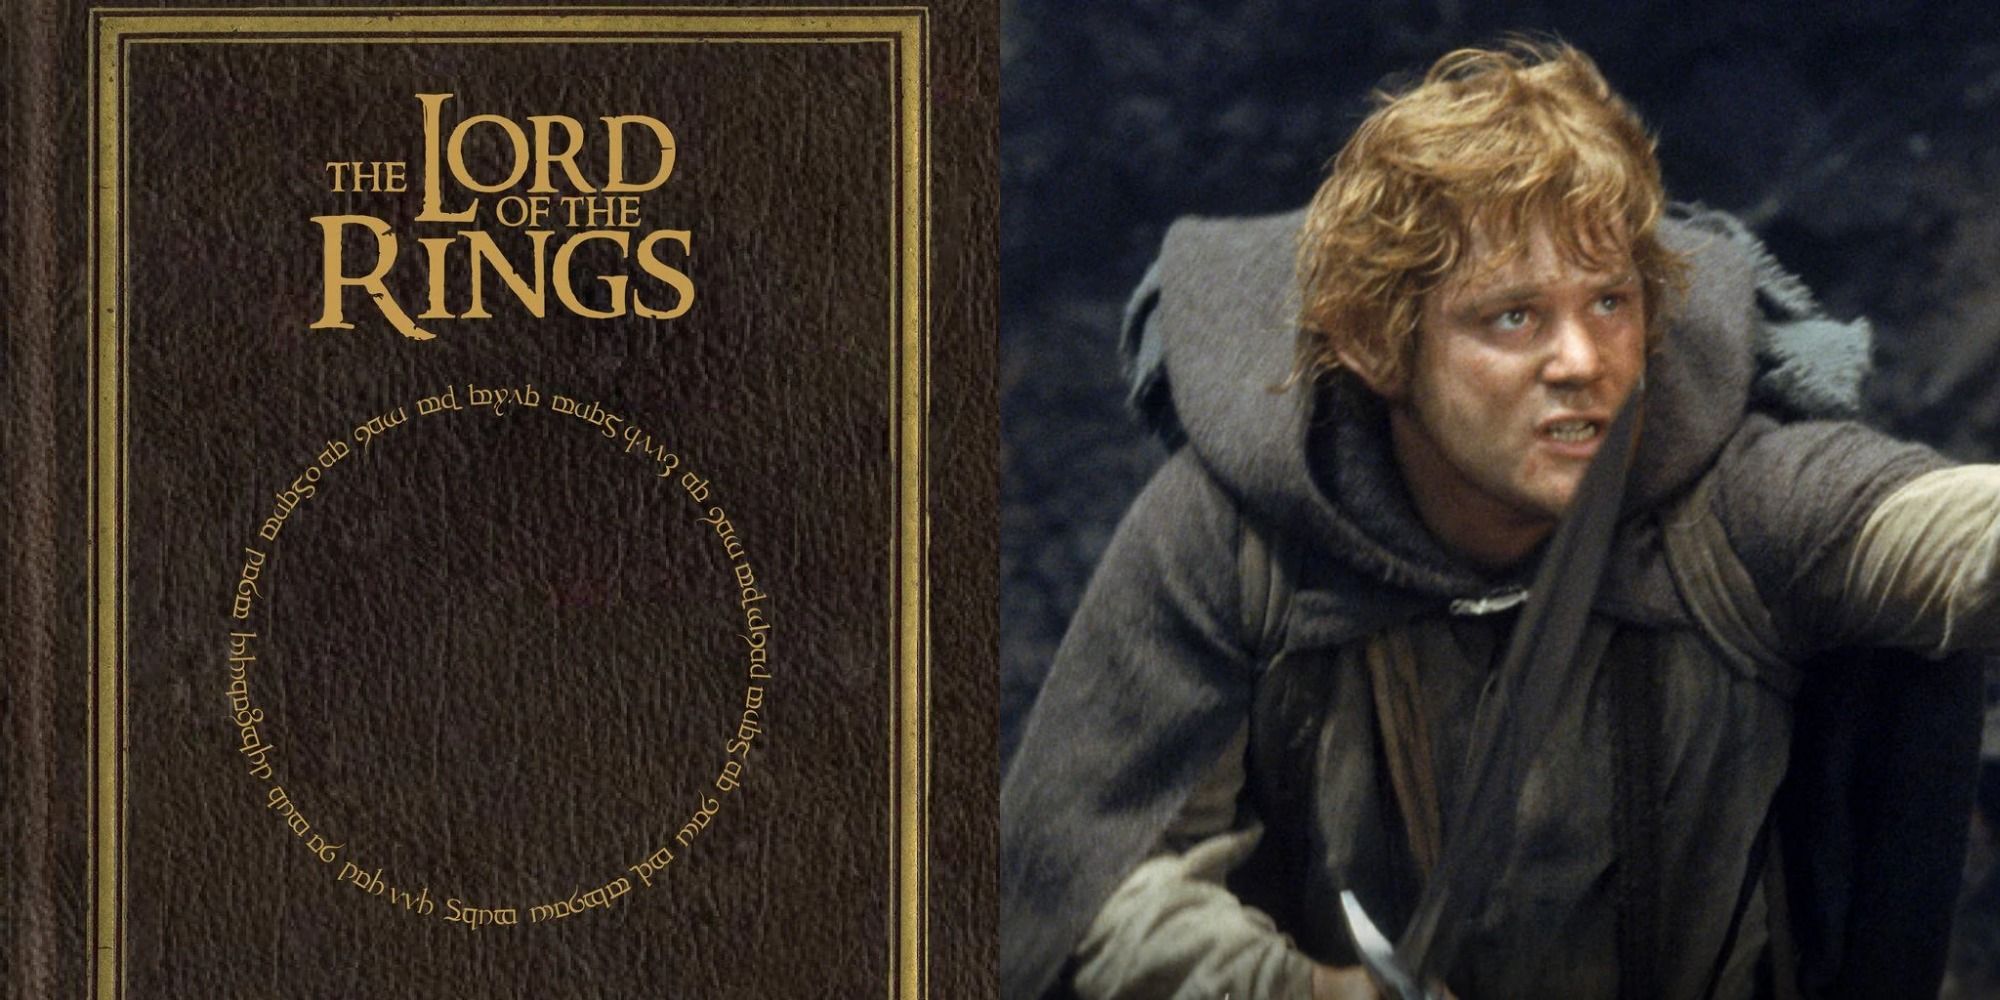 a split image showing The Lord of the Rings book cover on the left and Sam from movie on the right. 